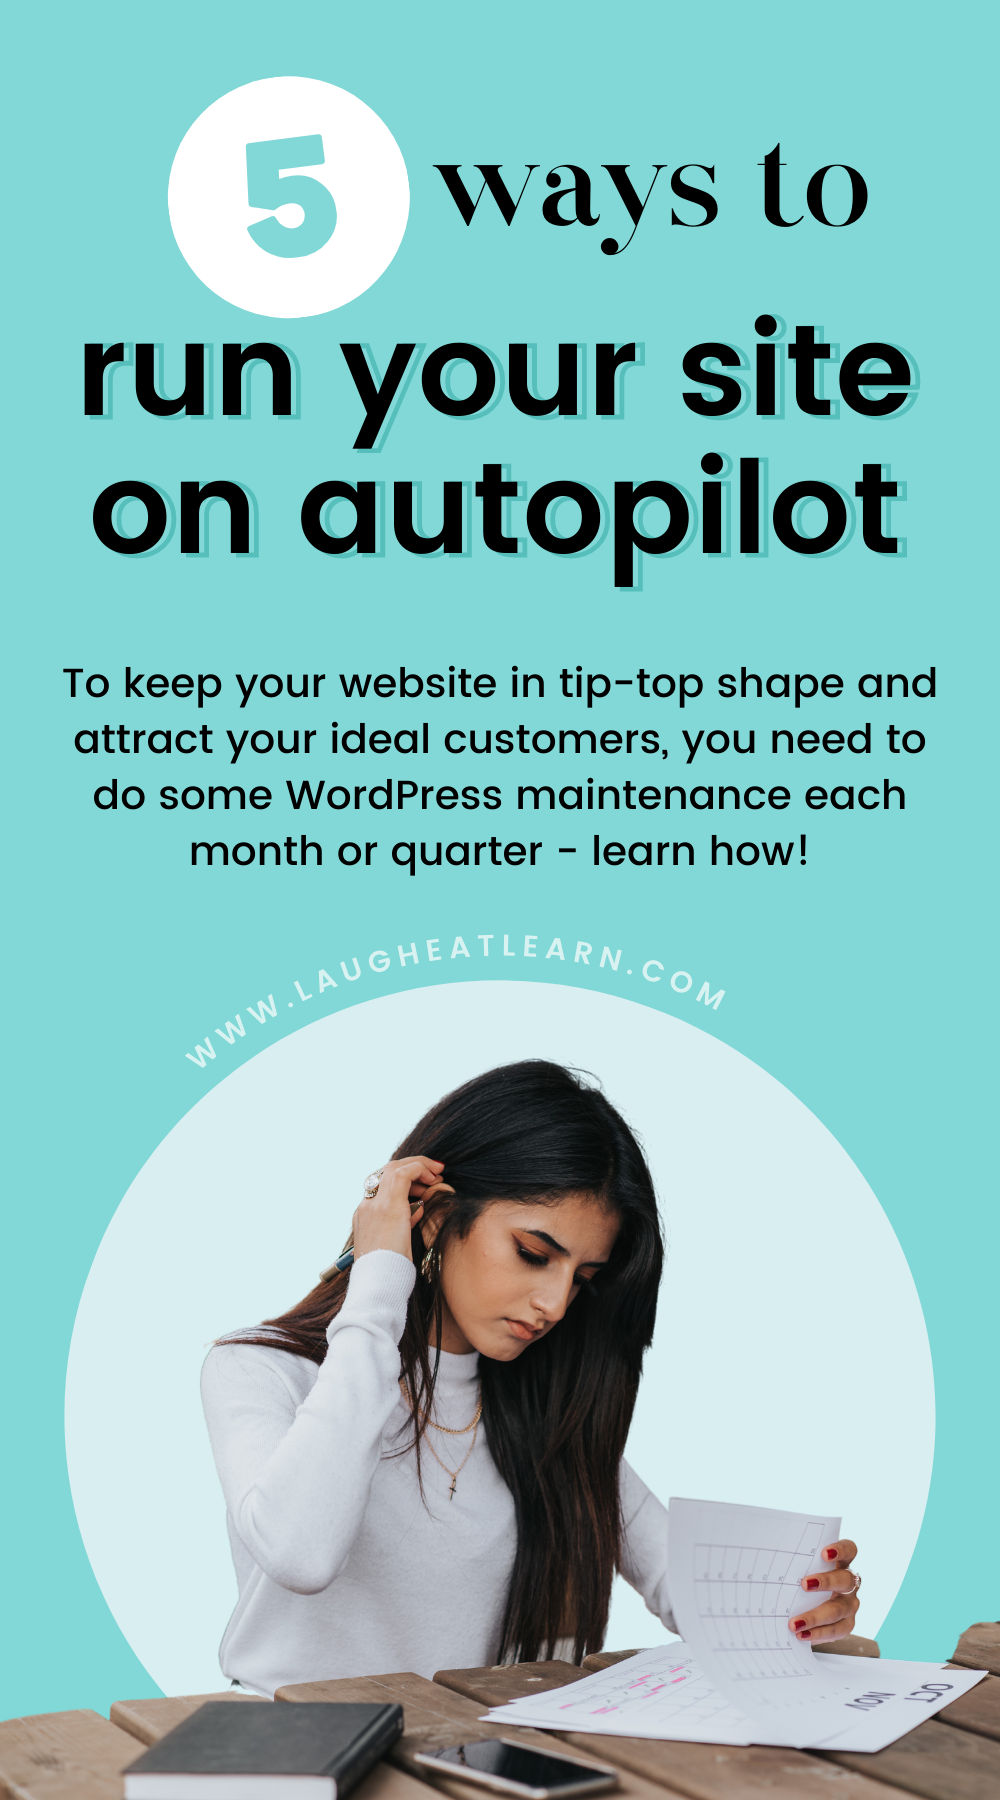 Pin that says "5 ways to run your site on autopilot"